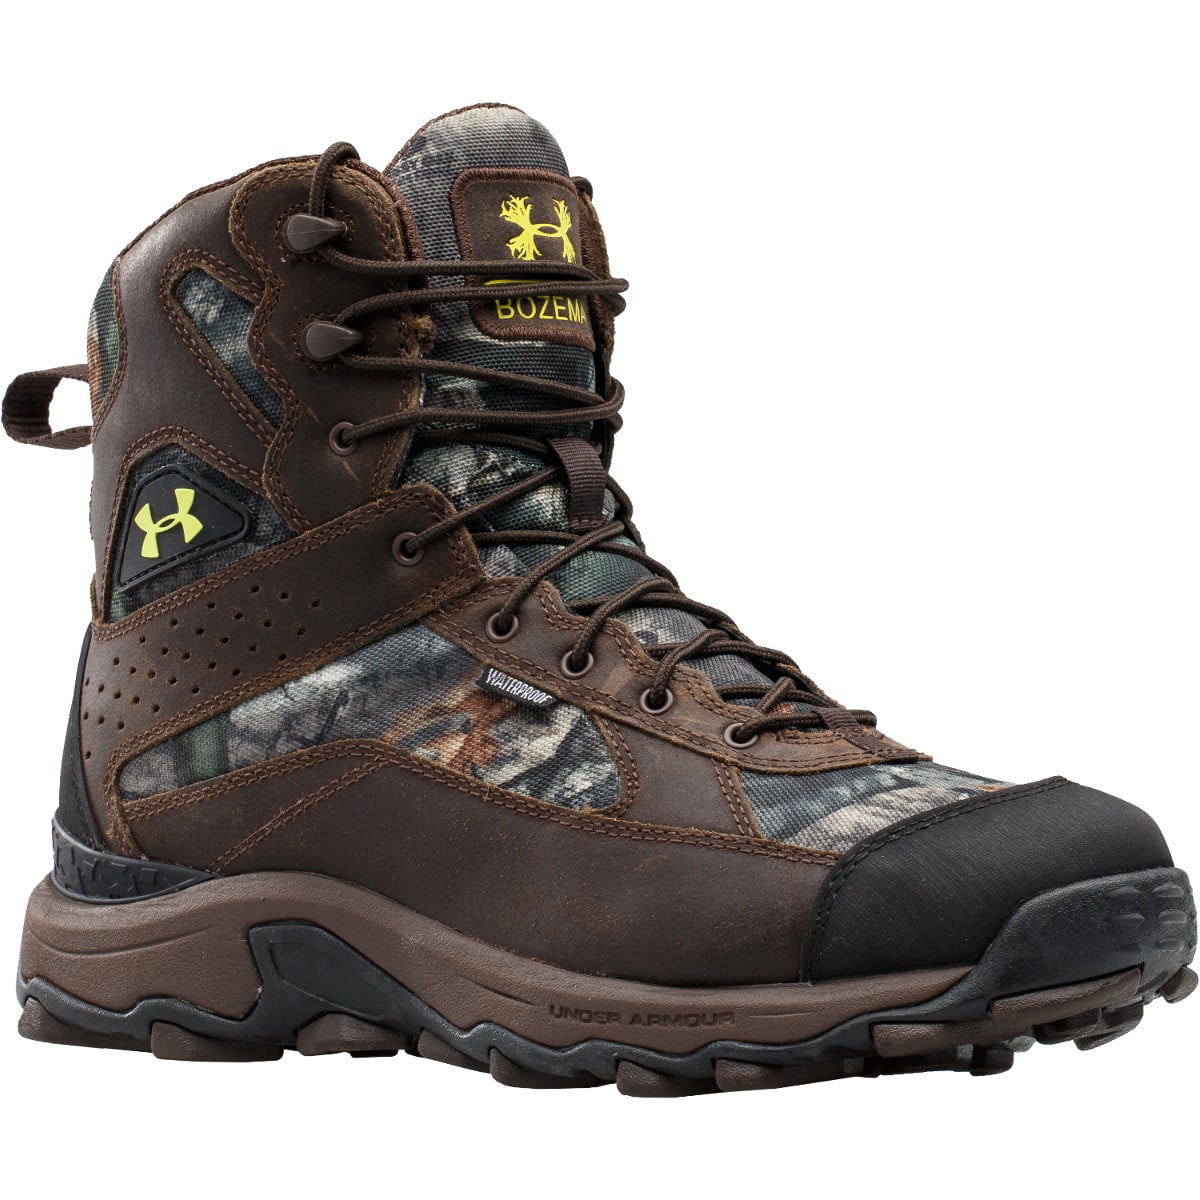 under armour bozeman 2. uninsulated hunting boots